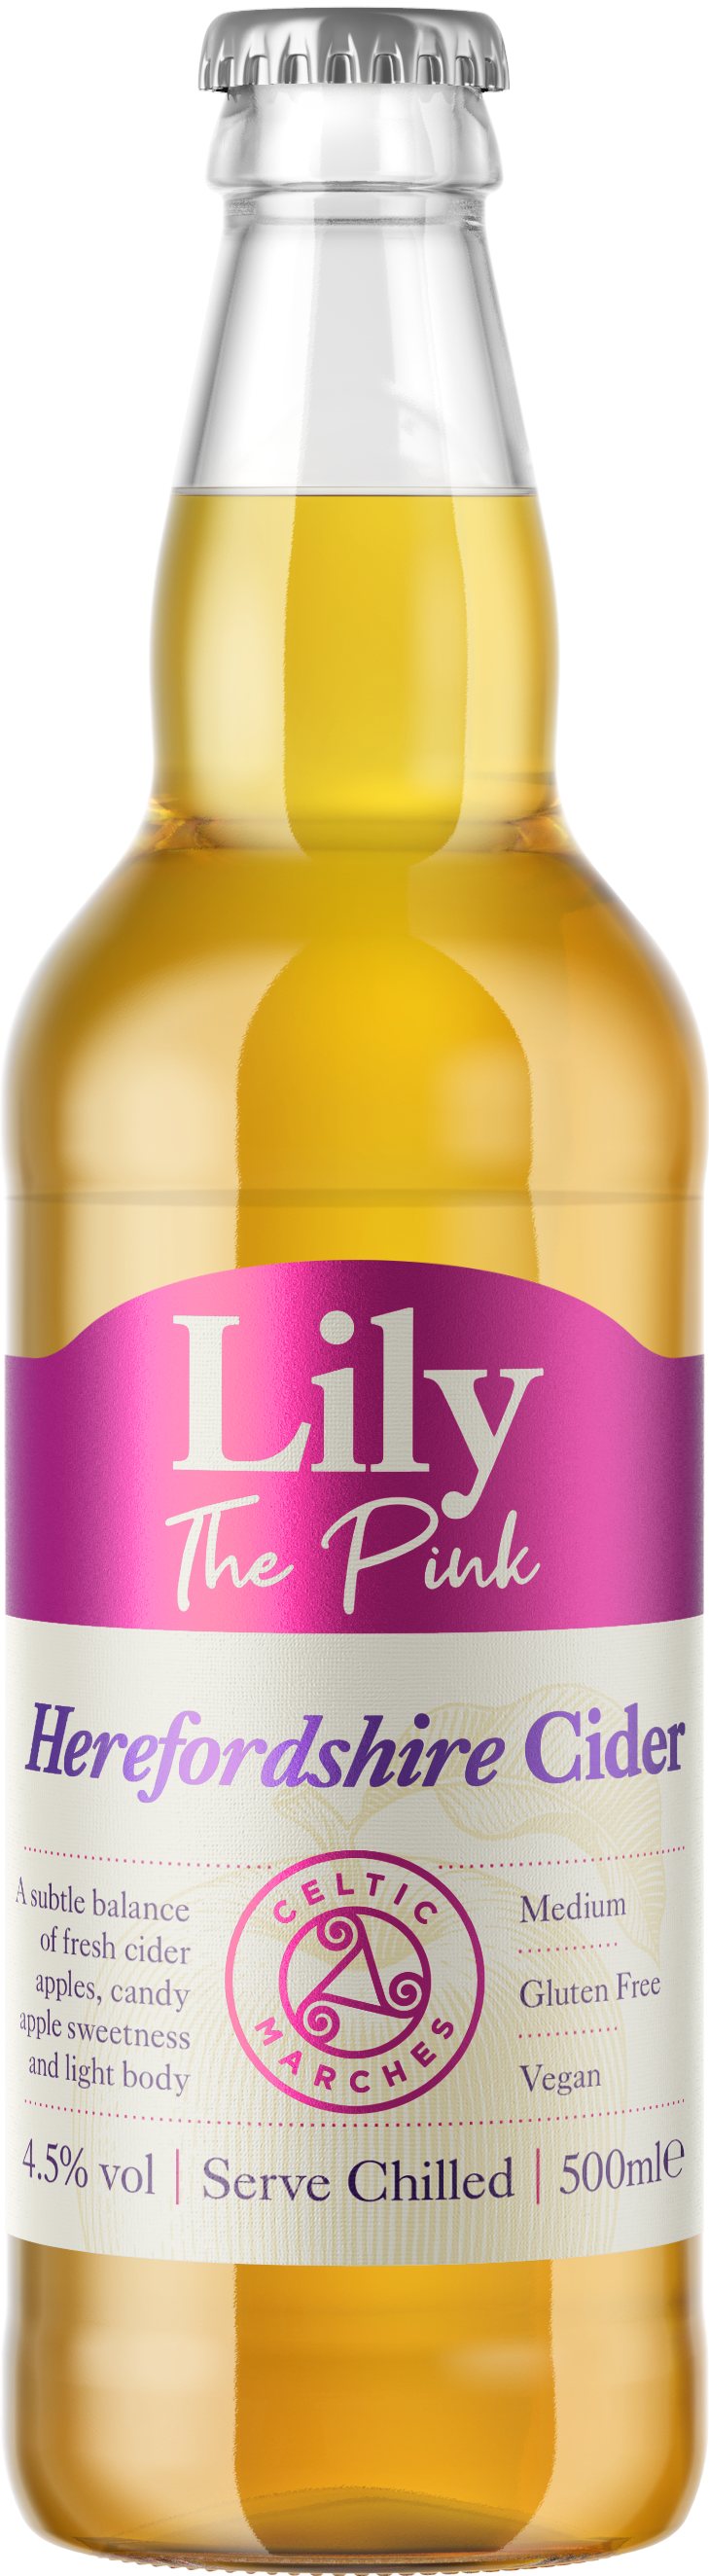 Lily The Pink 4.5% 12 x 500ml Bottles